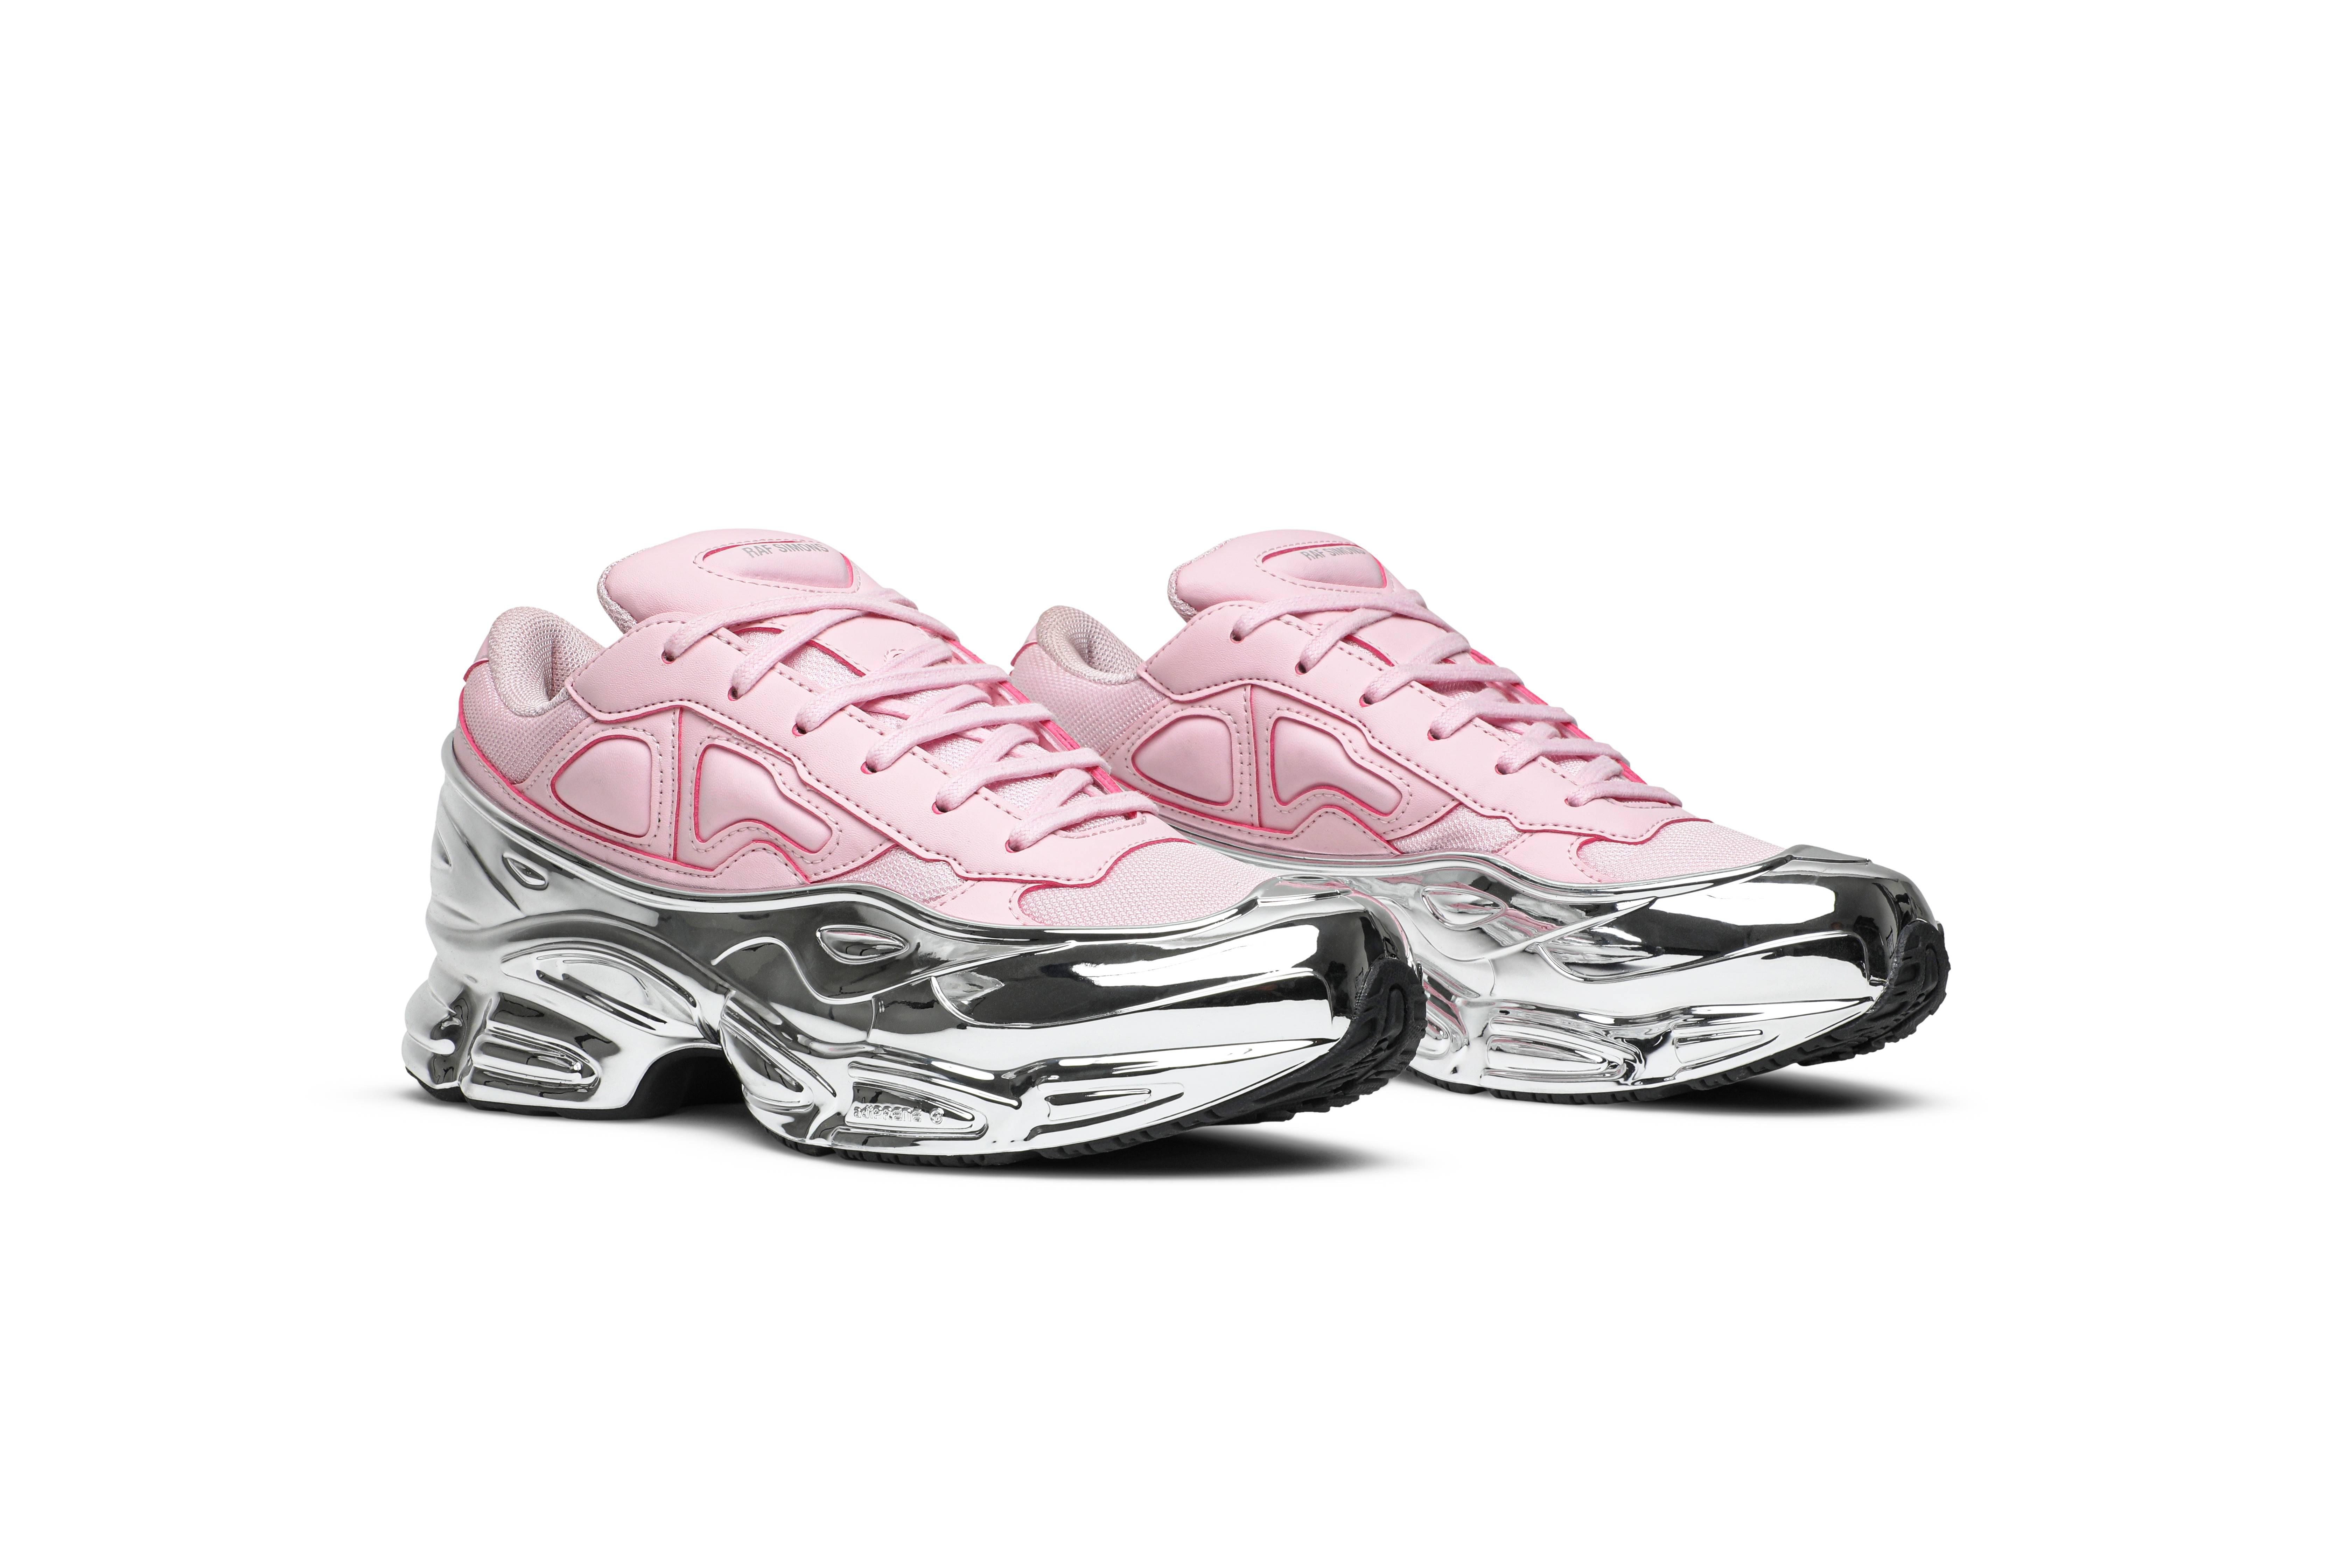 adidas Raf Simons X Ozweego in Pink for Men - Lyst